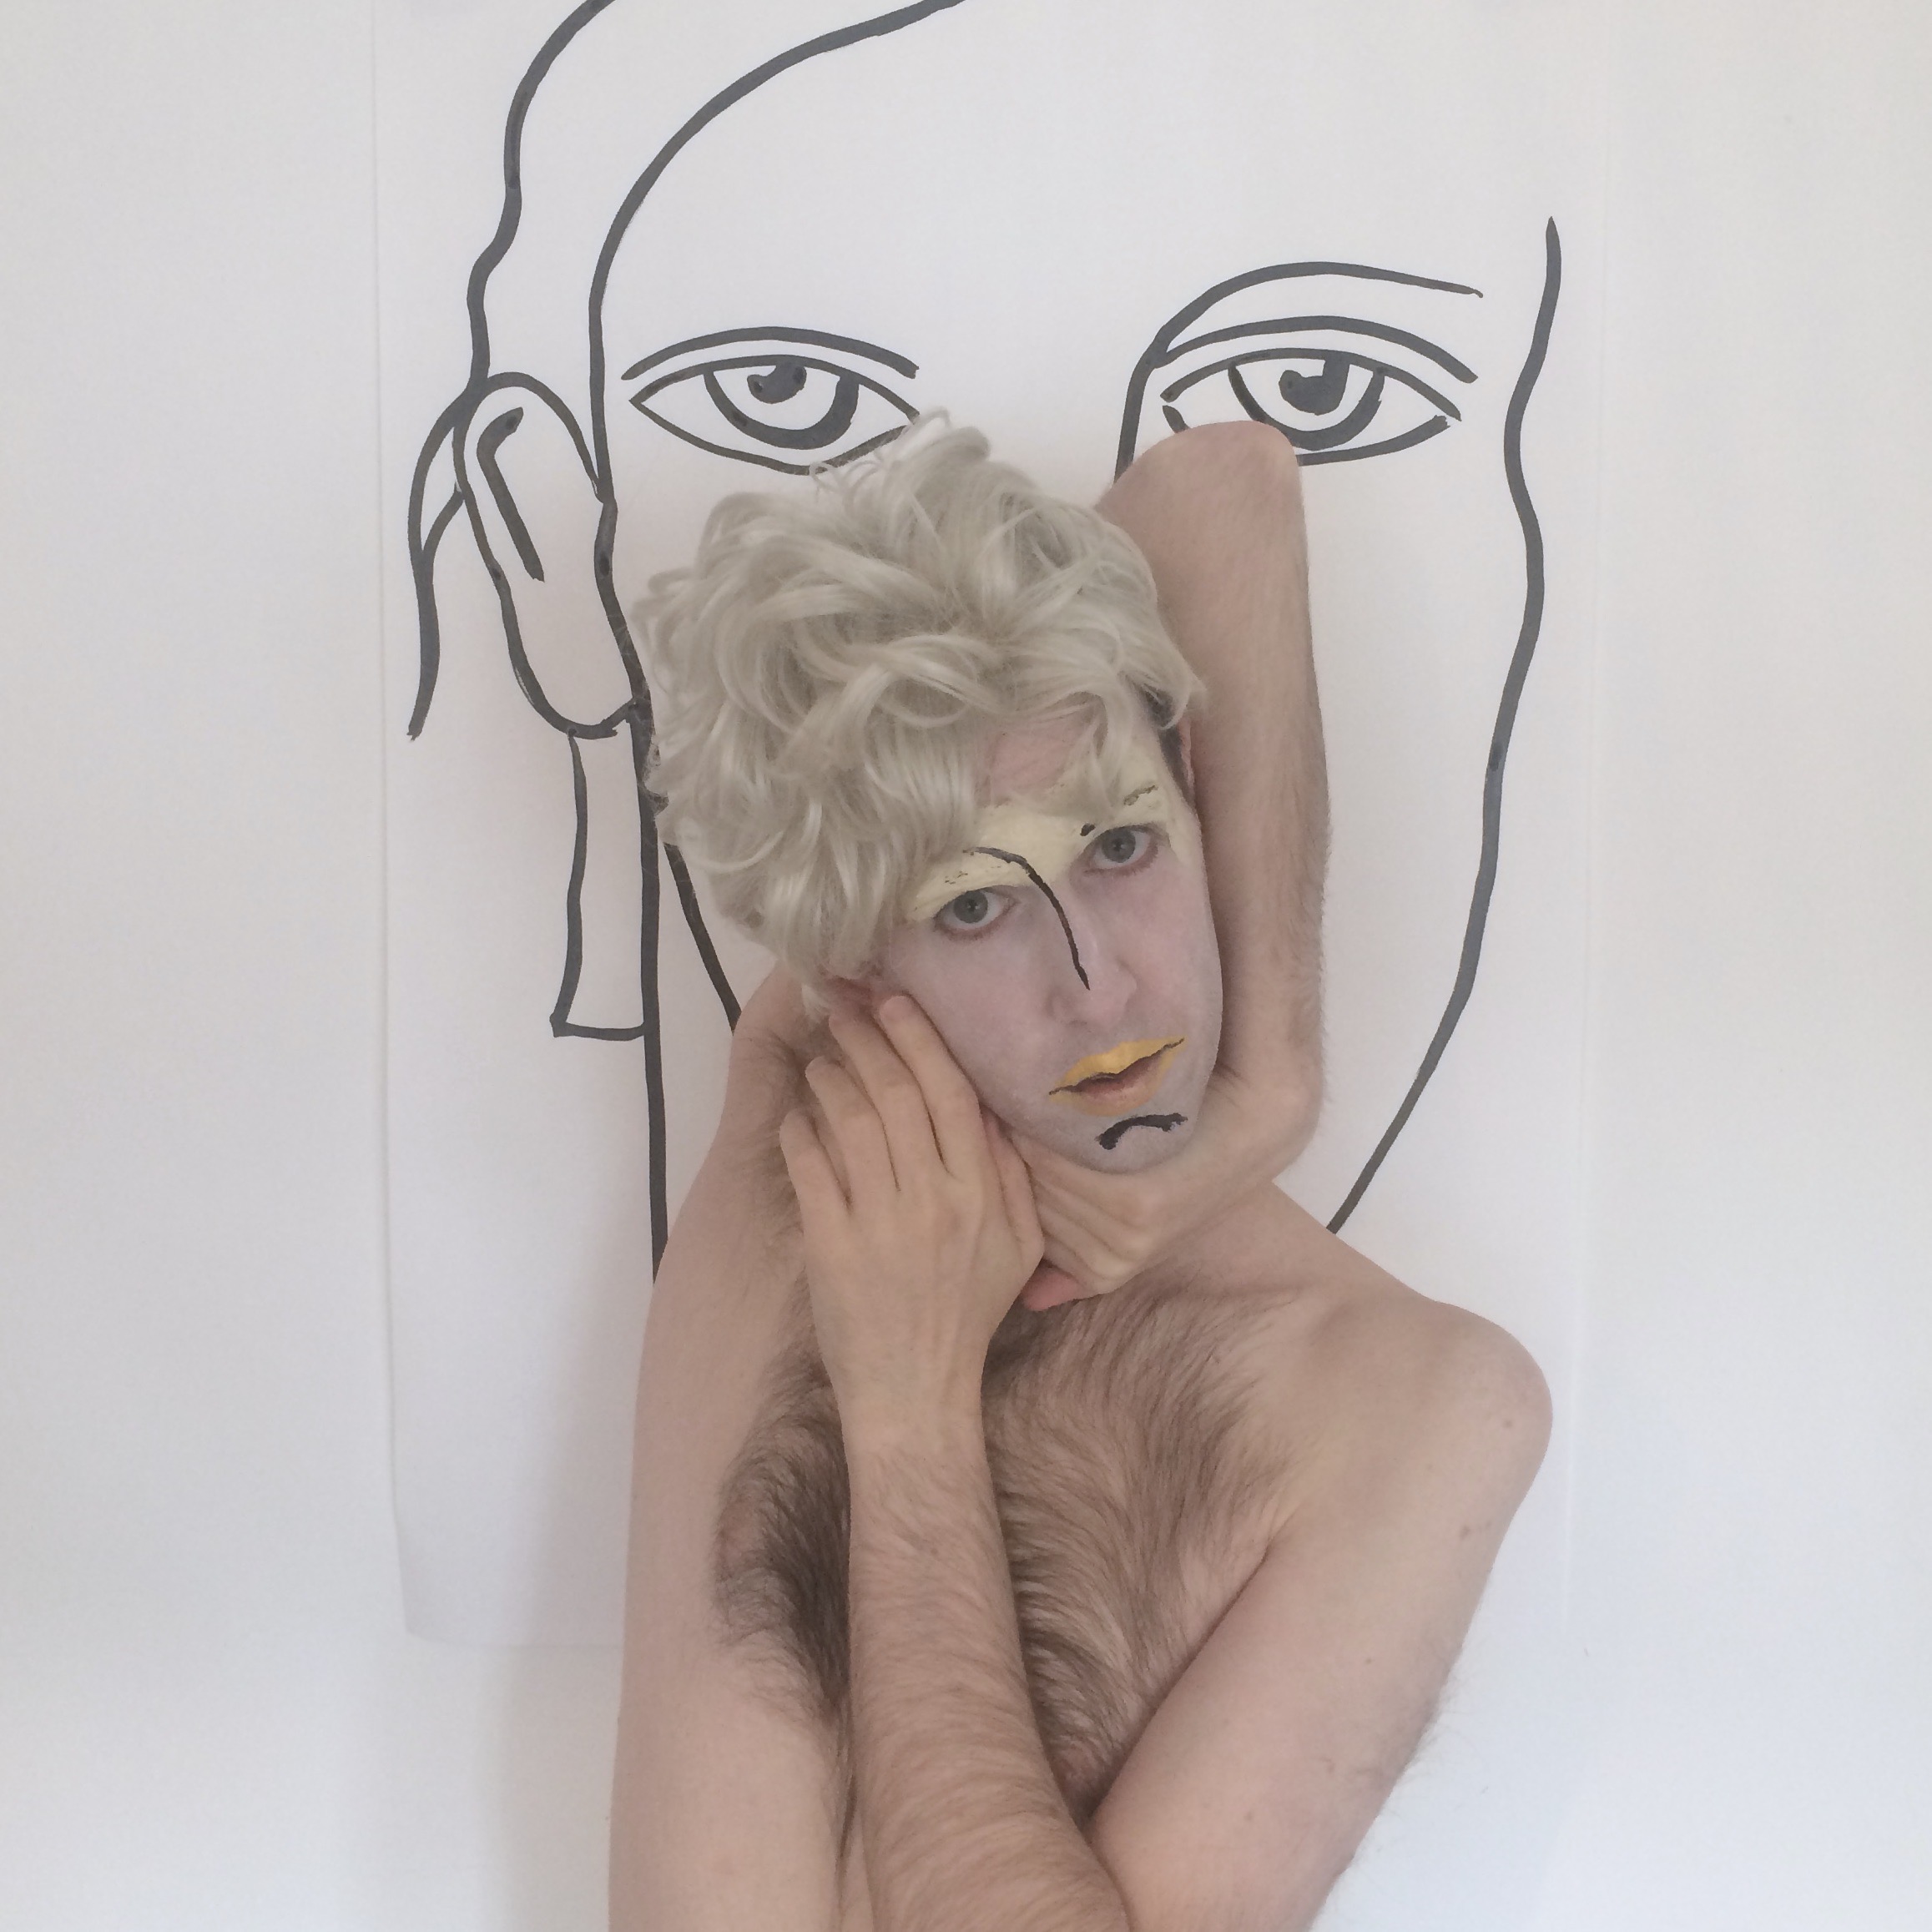 A man in the centre of the image, the top half of his body capture, his arms positioned in a vogue-like pose with his face painted